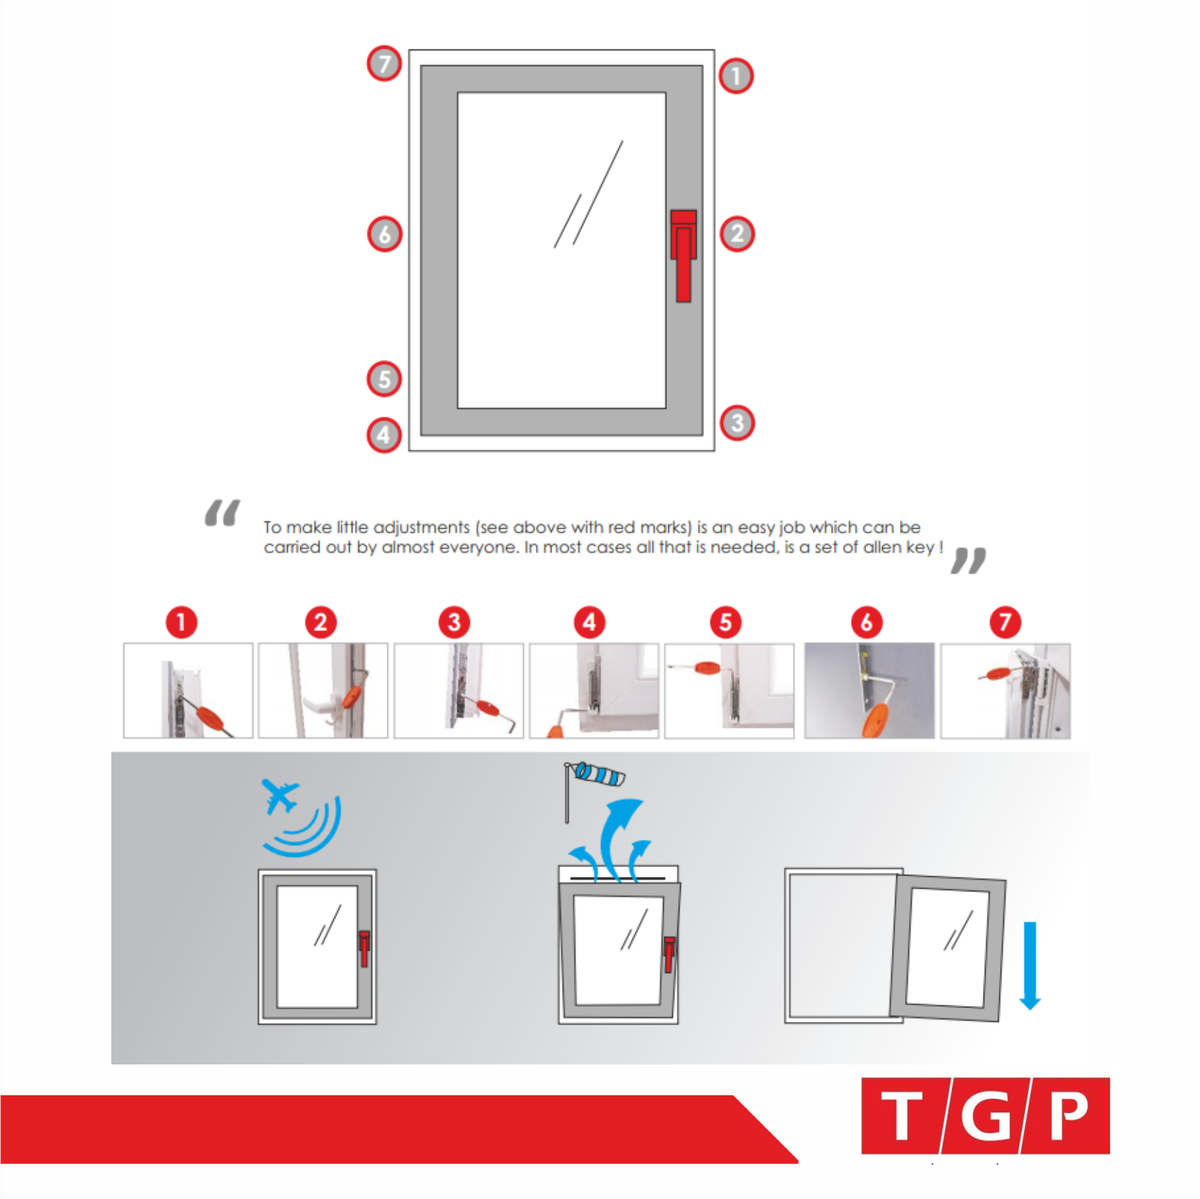 Windows and doors can losetheirpositioning on theframeover time. Theleak of sound and air is likelyto be a matter of gasketpressure. And allyouneedtoovervometheseissues is an allenkey! #windows#windowanddoor#doors